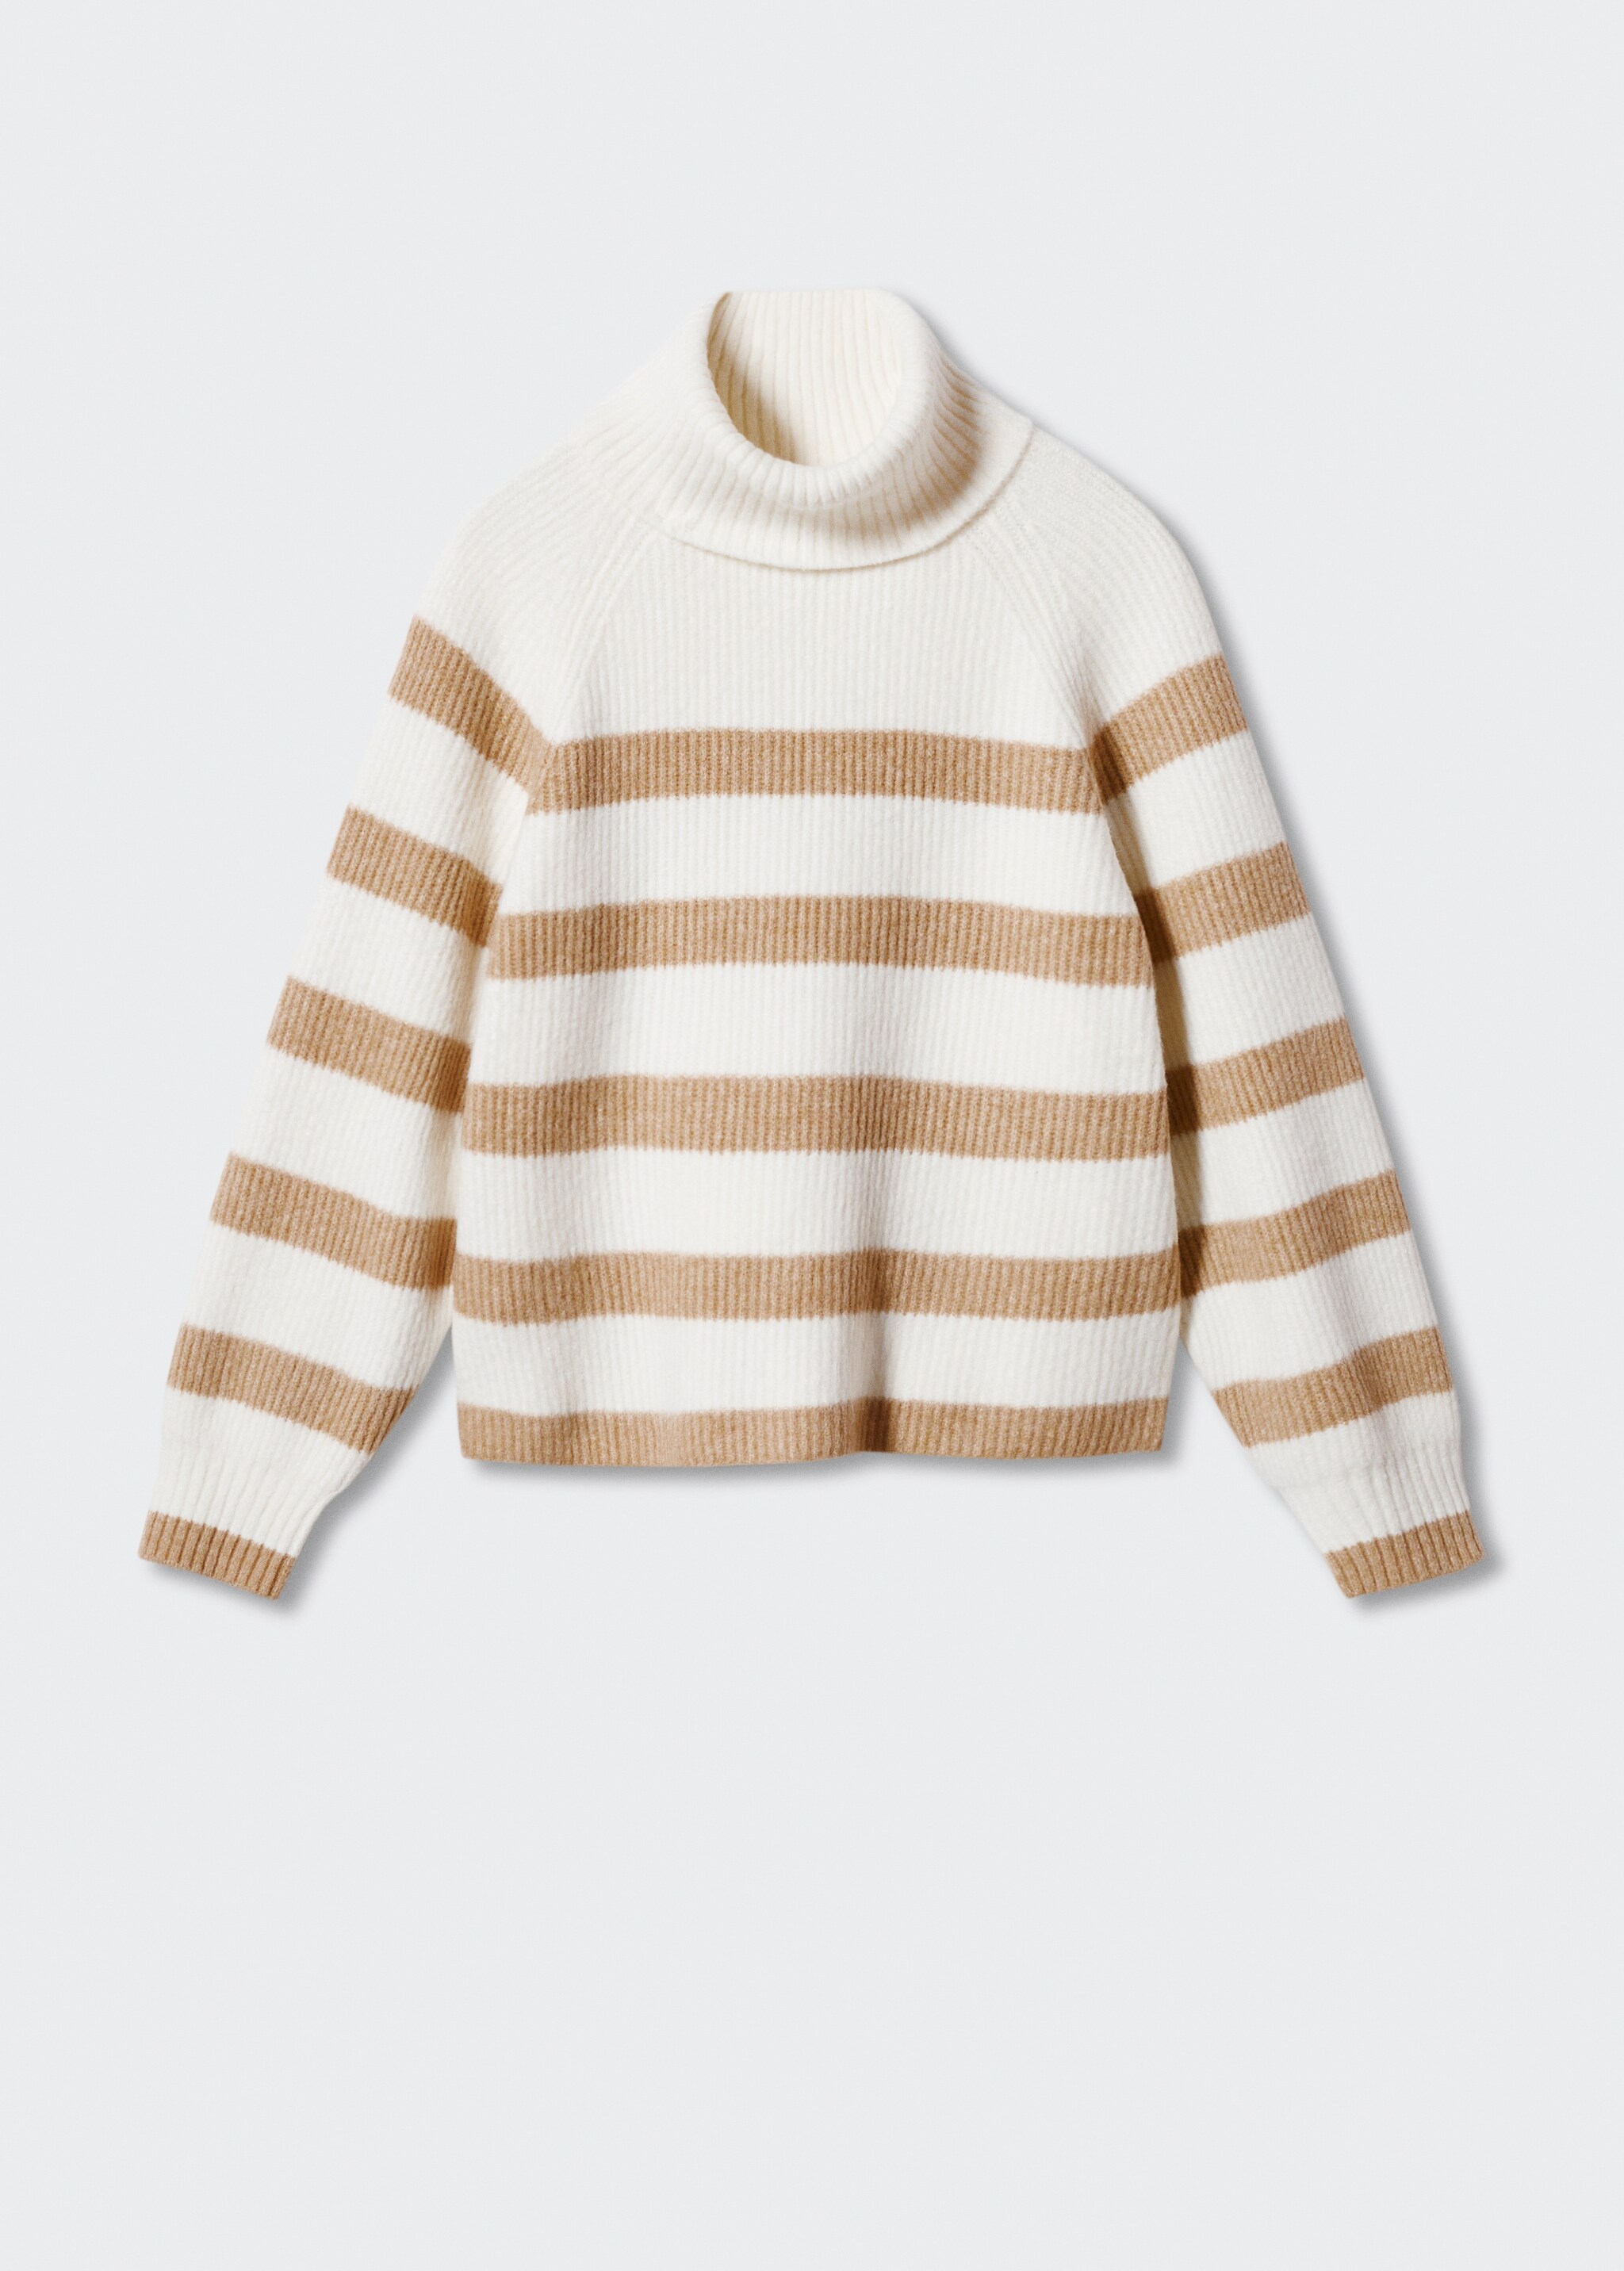 Striped turtleneck sweater - Article without model